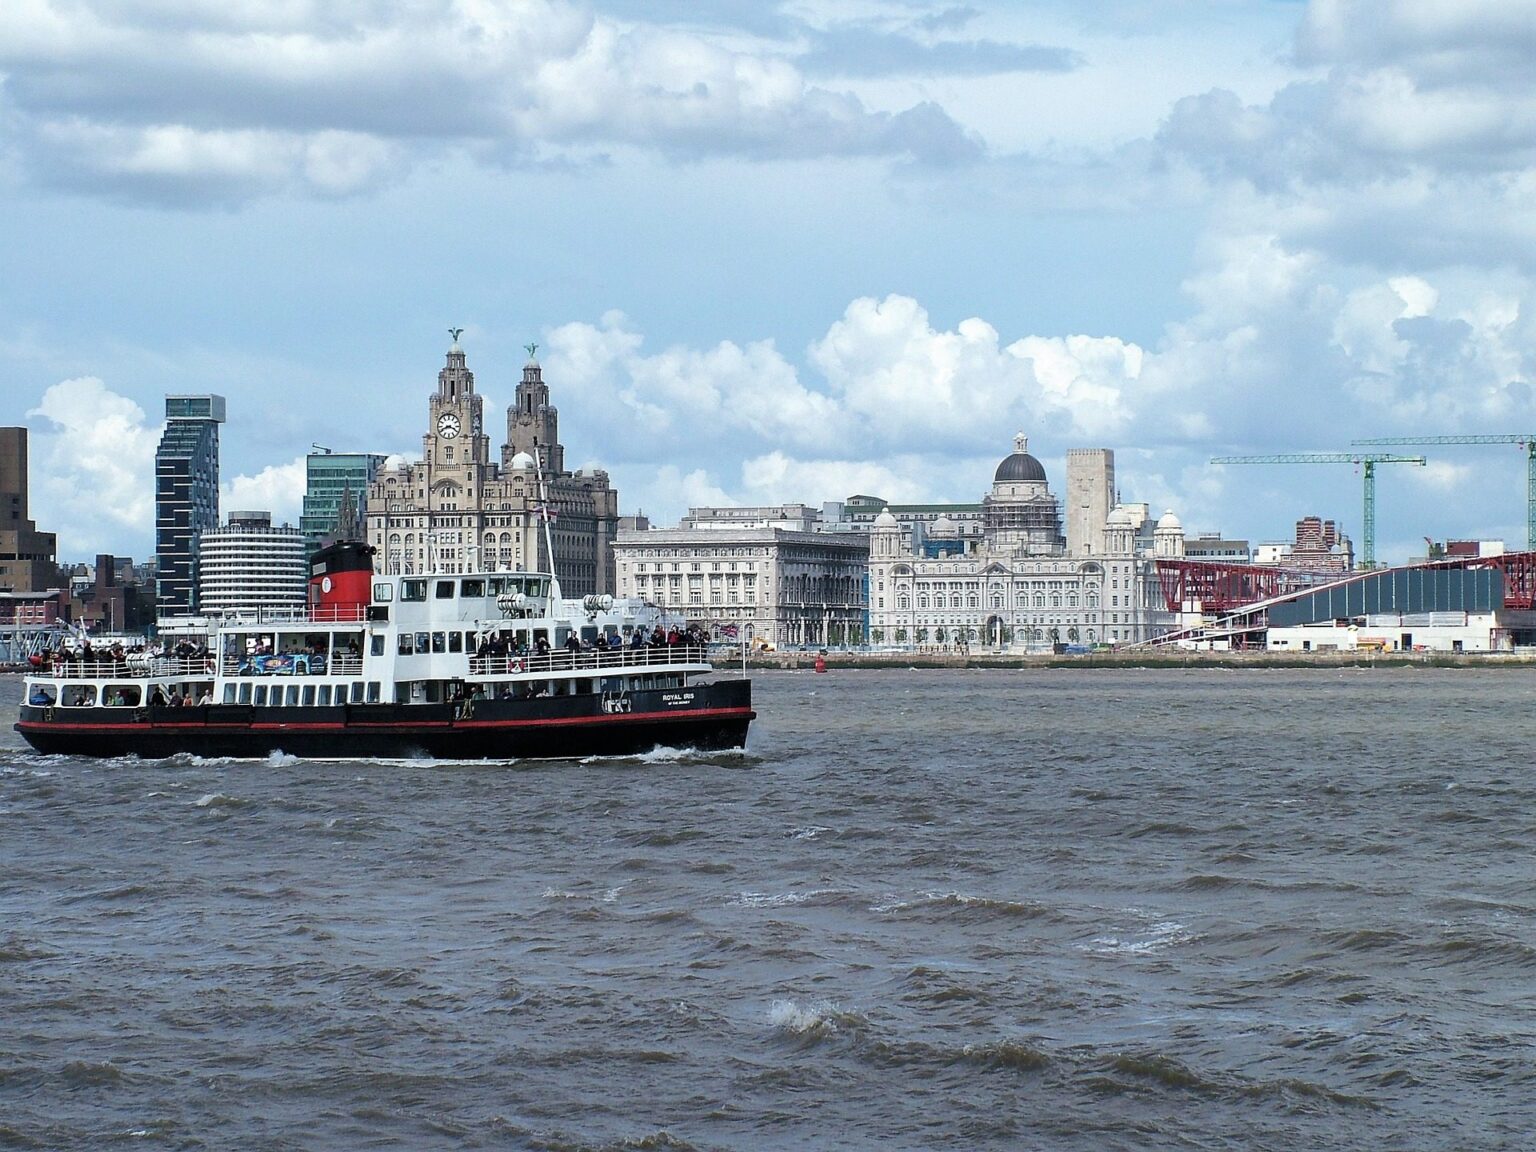 Liverpool waterfront with the Three Graces